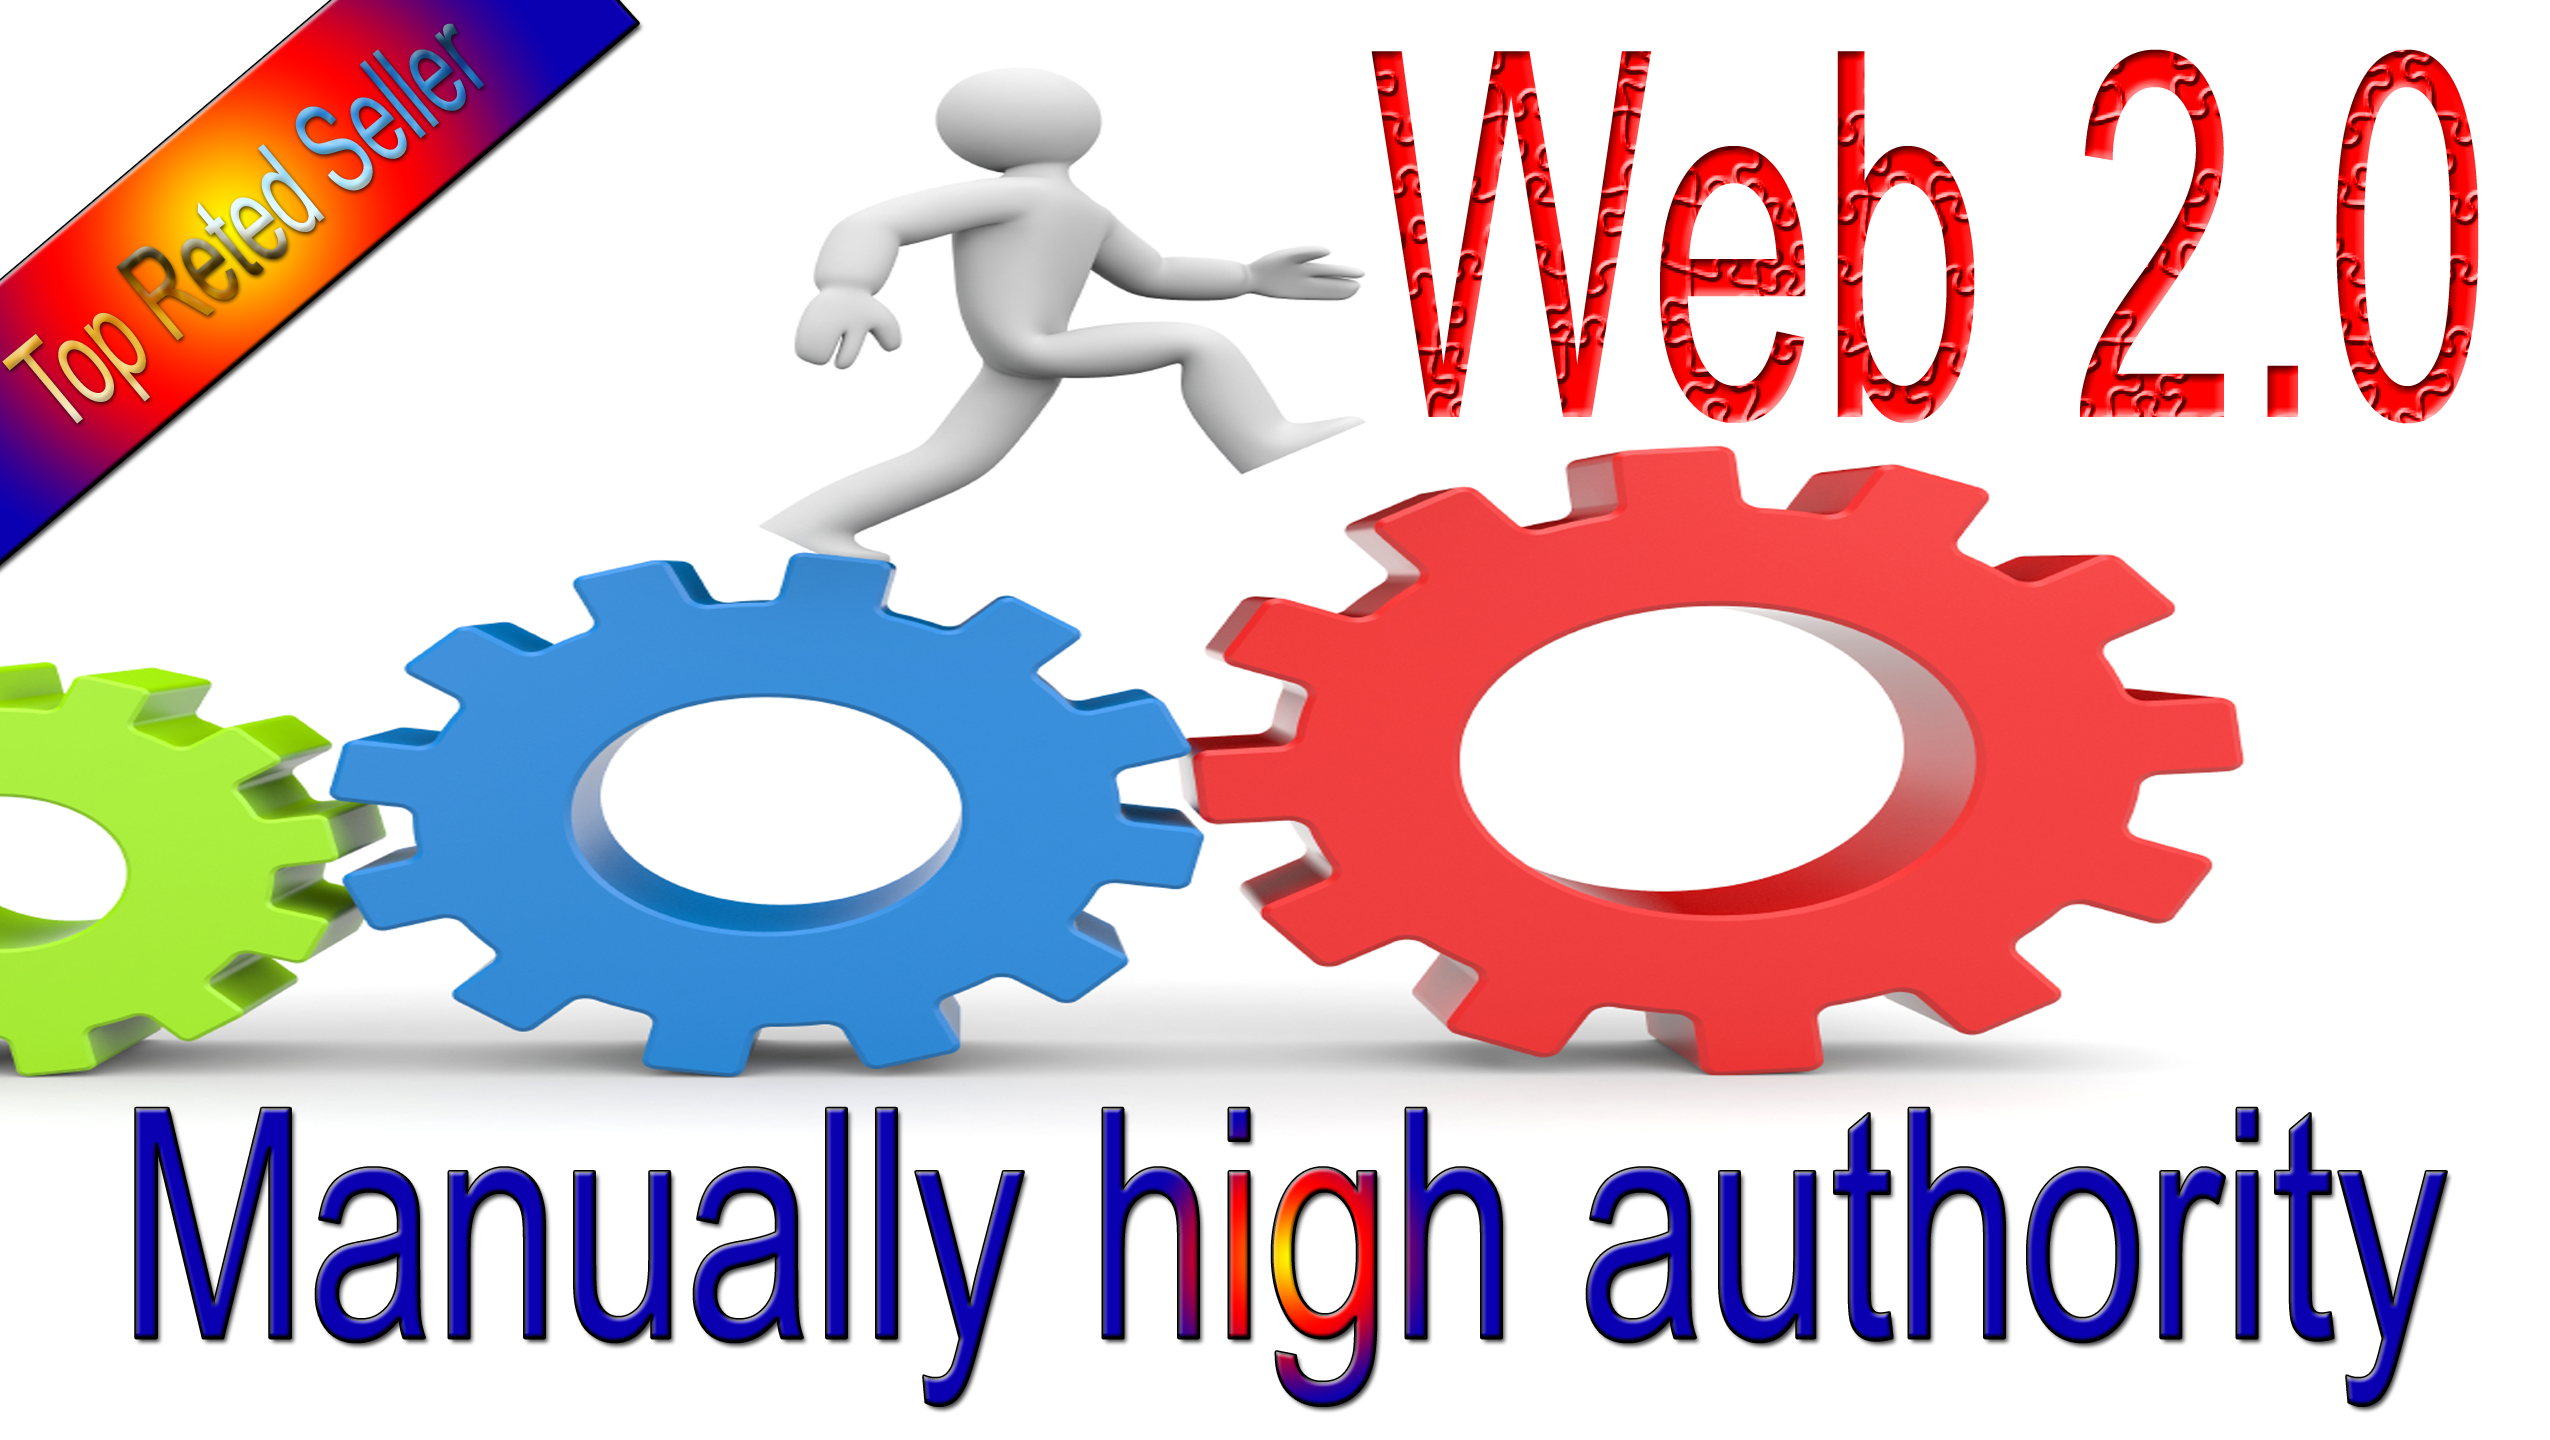 Get rank with 30 manually high authority web 2.0 backlinks